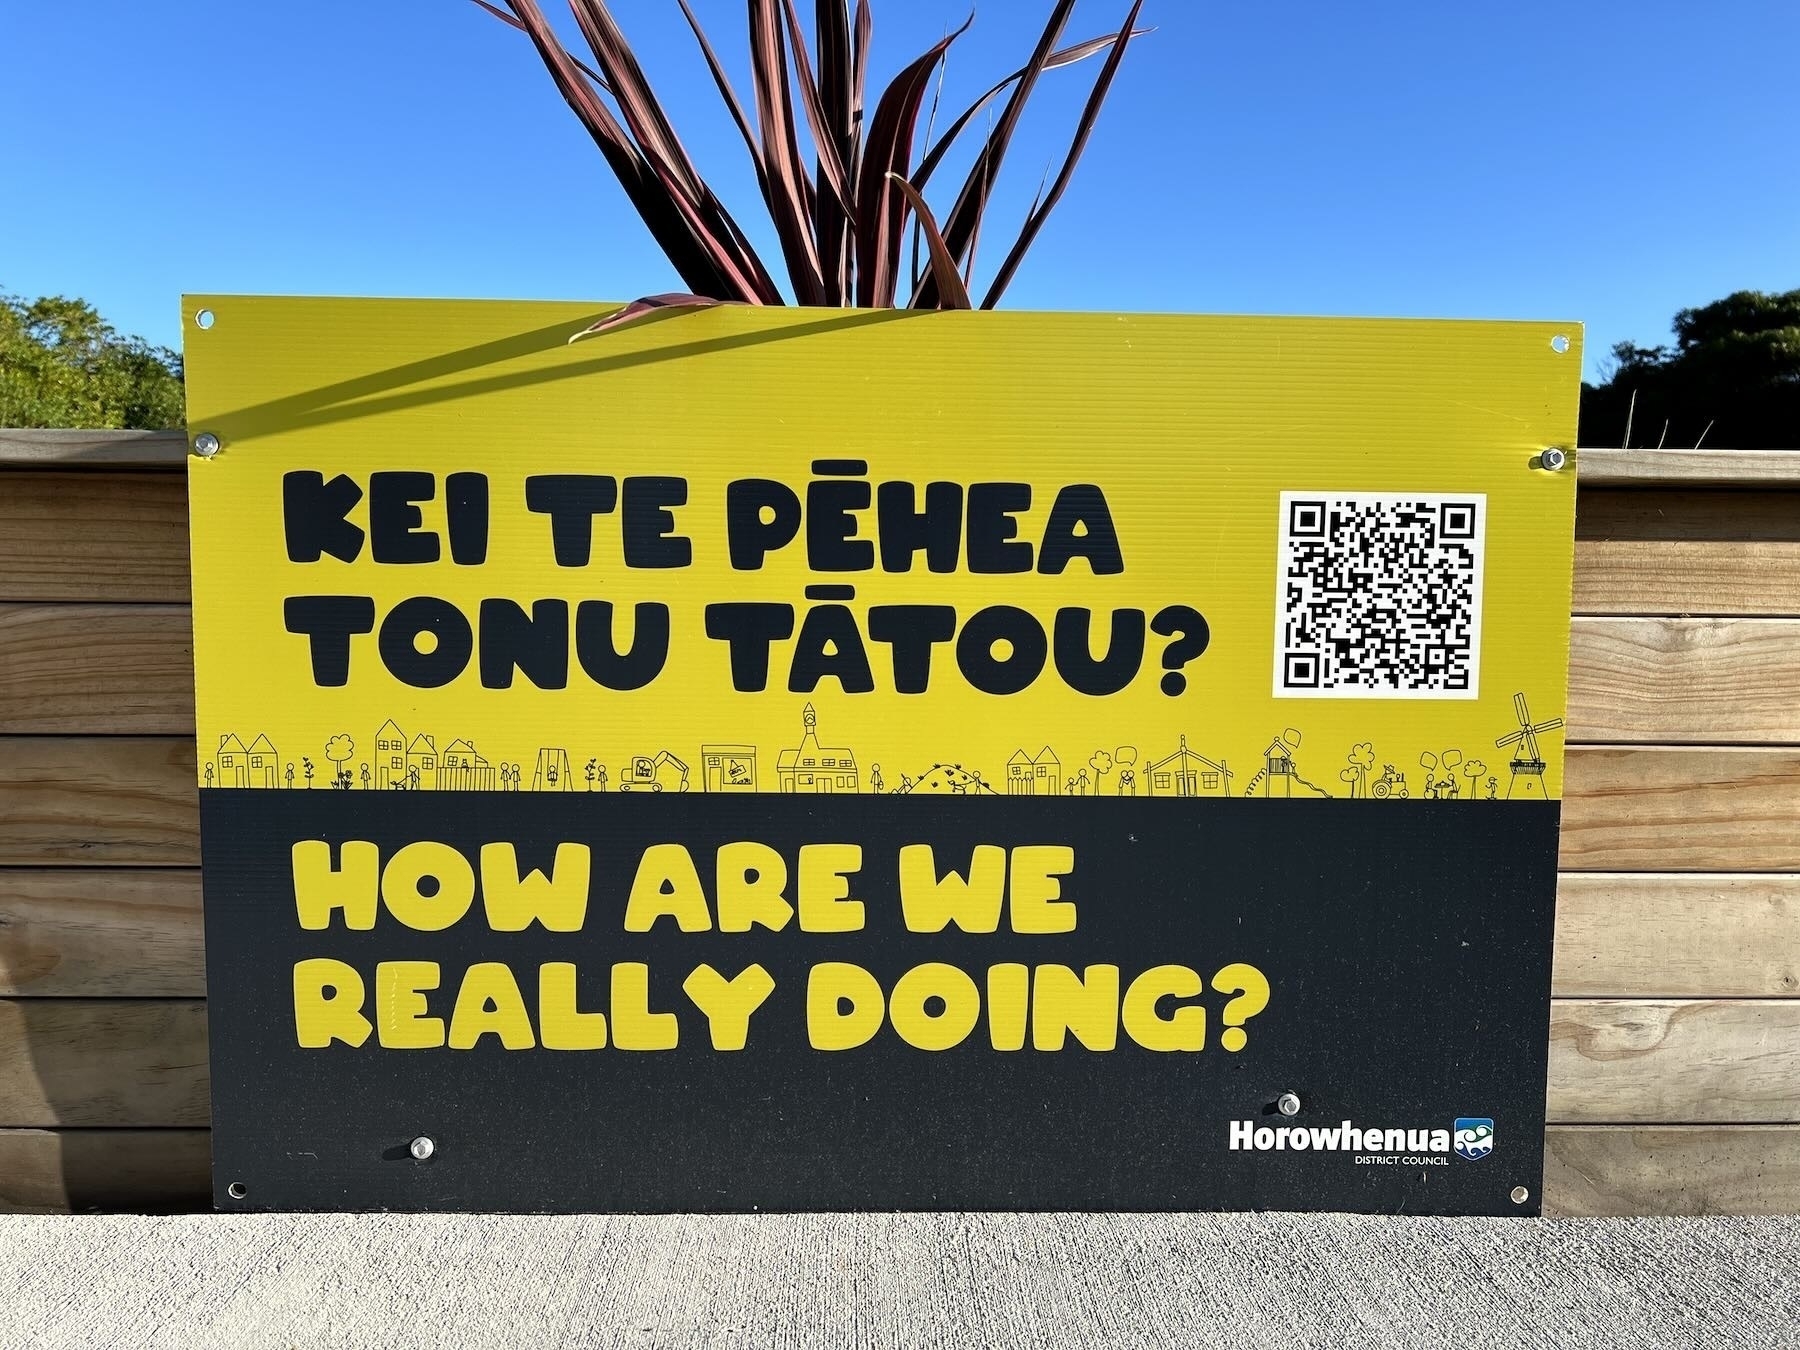 Yellow and black bilingual sign in an outdoor public setting. 